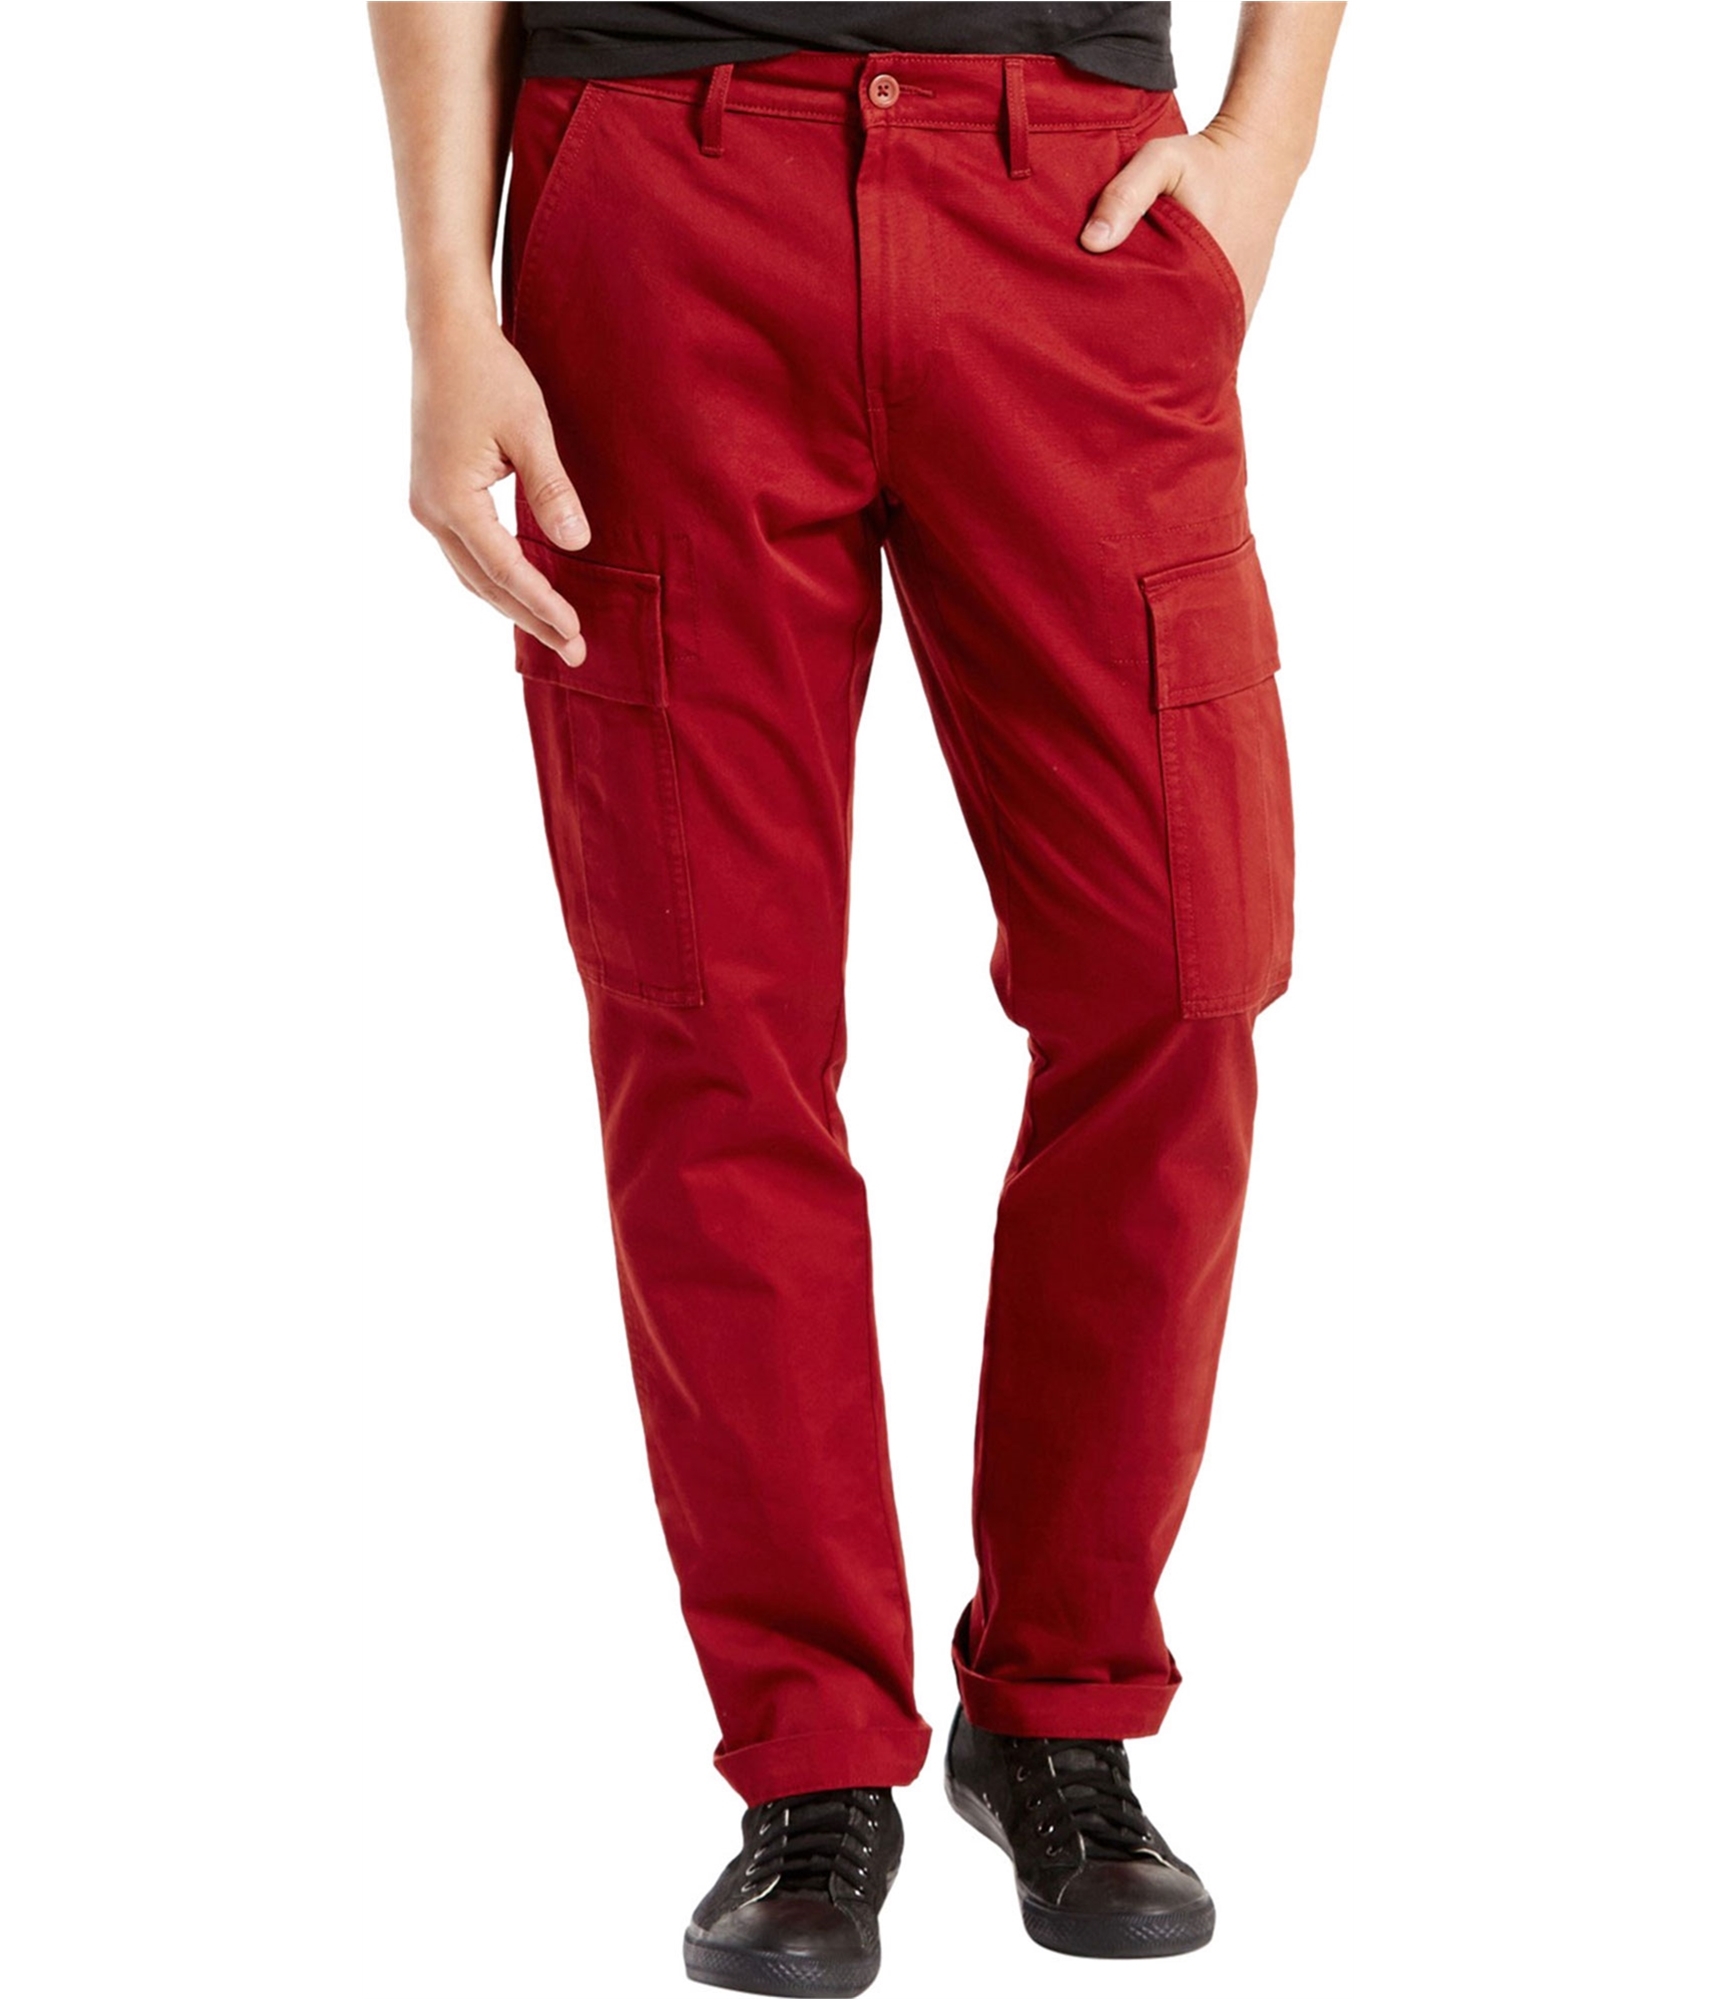 Buy a Mens Levi's 541 Athletic Fit Casual Cargo Pants Online |  